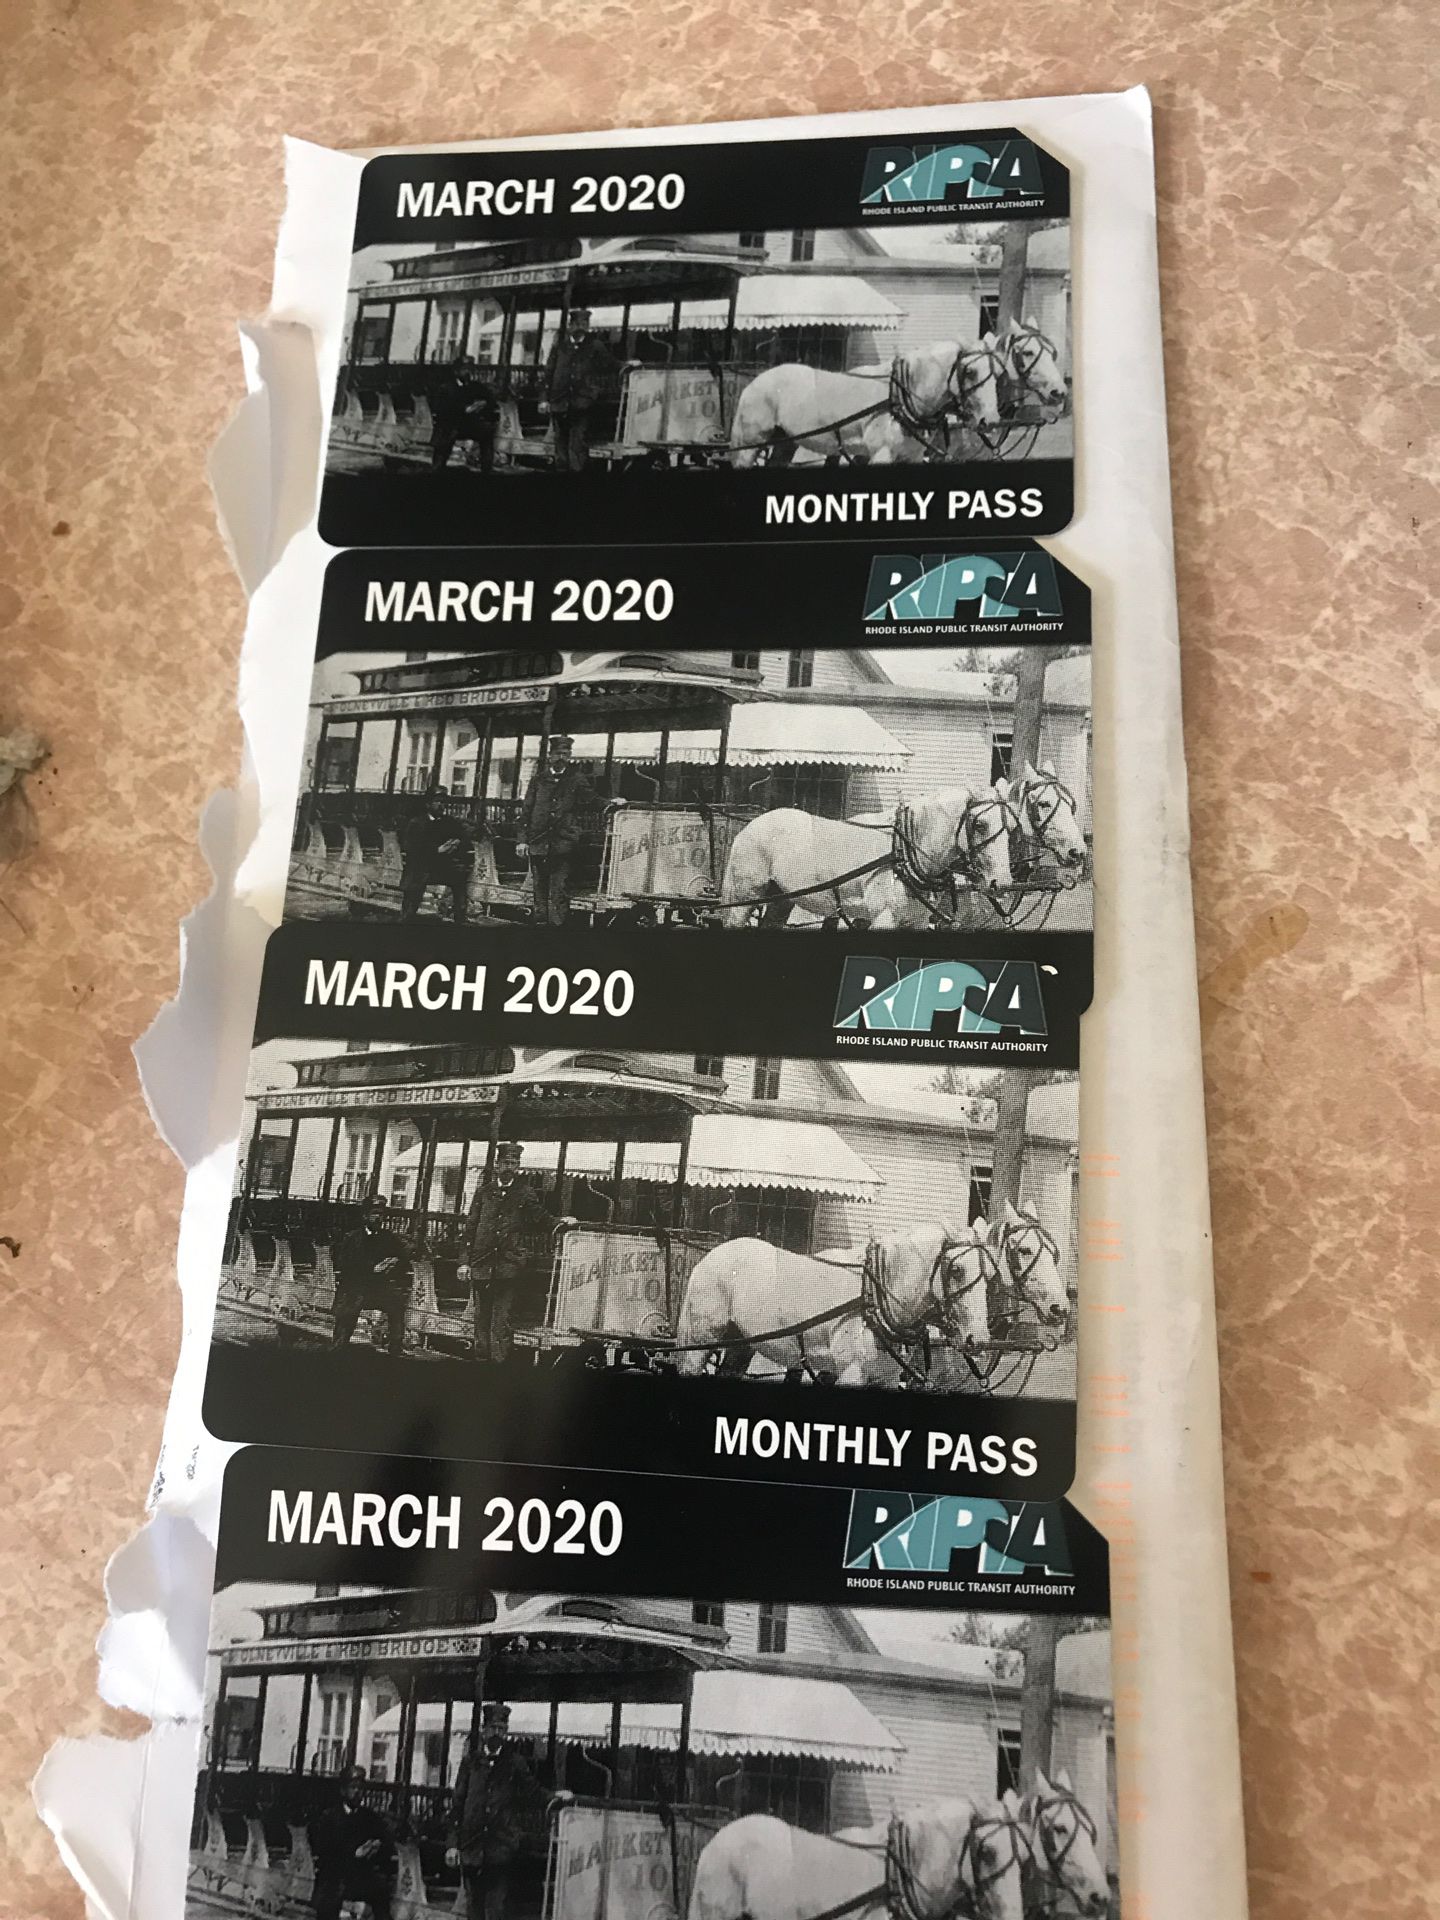 March bus pass